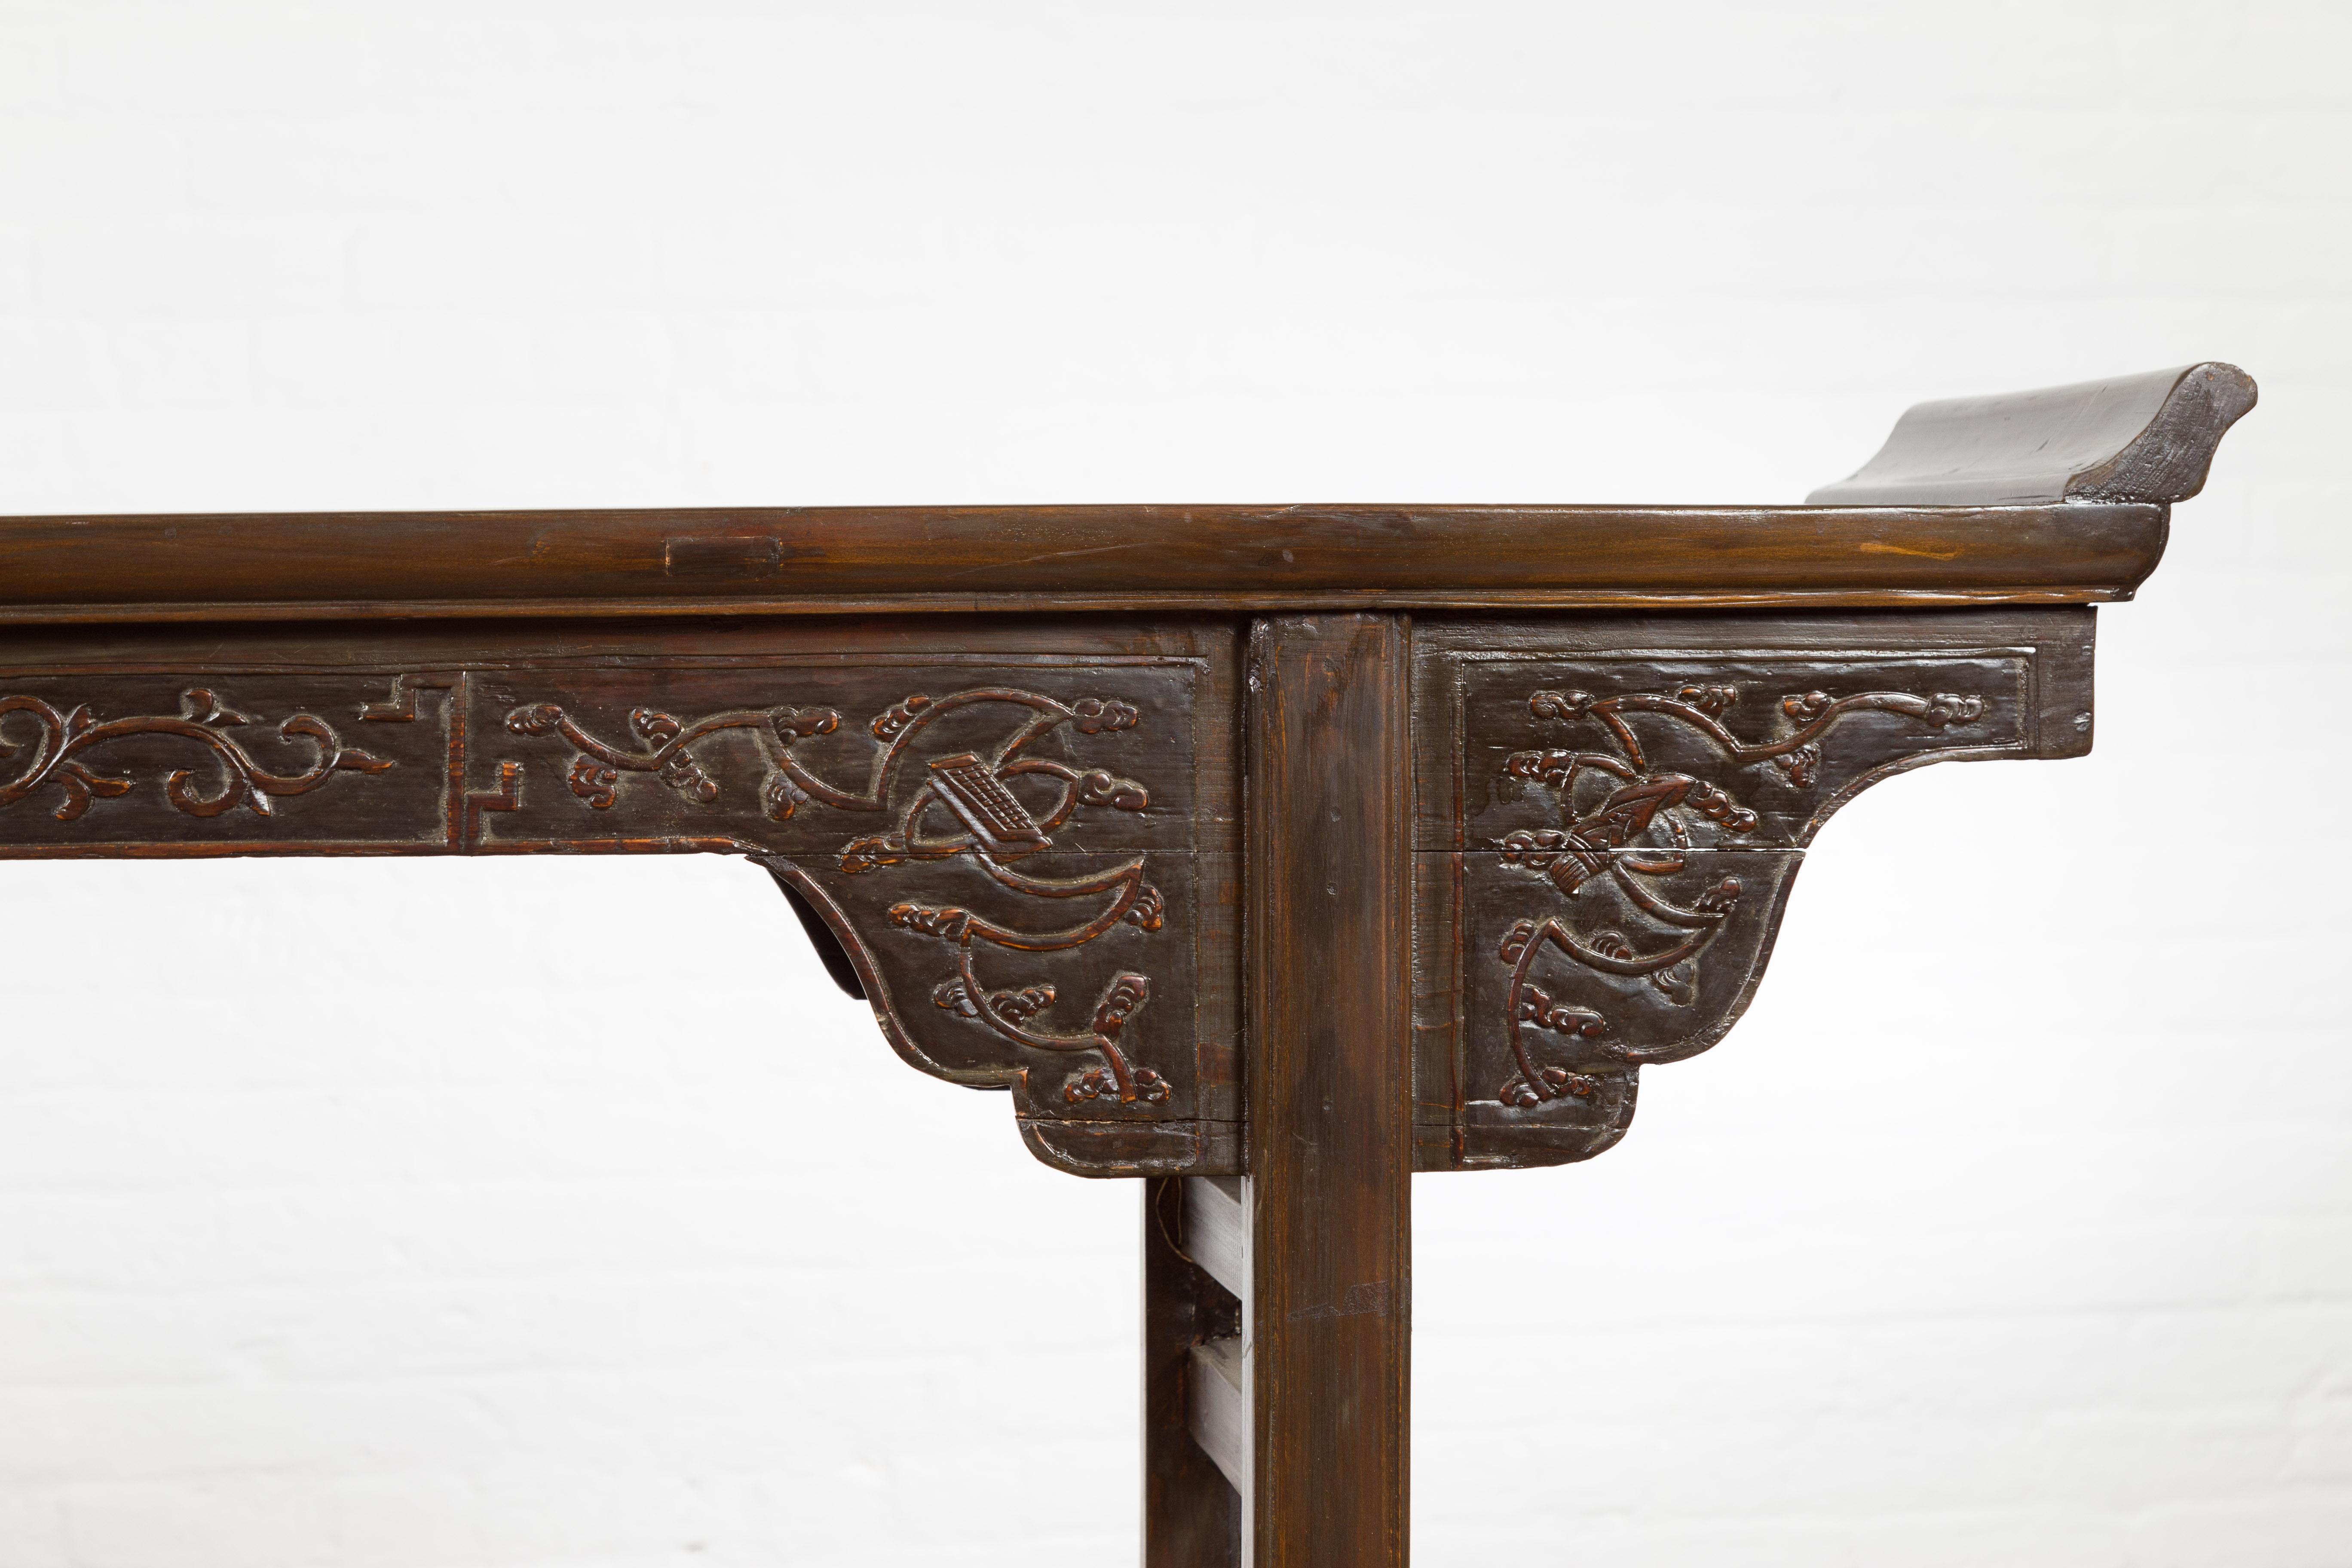 Chinese Qing Dynasty 19th Century Altar Console Table with Foliage-Carved Apron 4